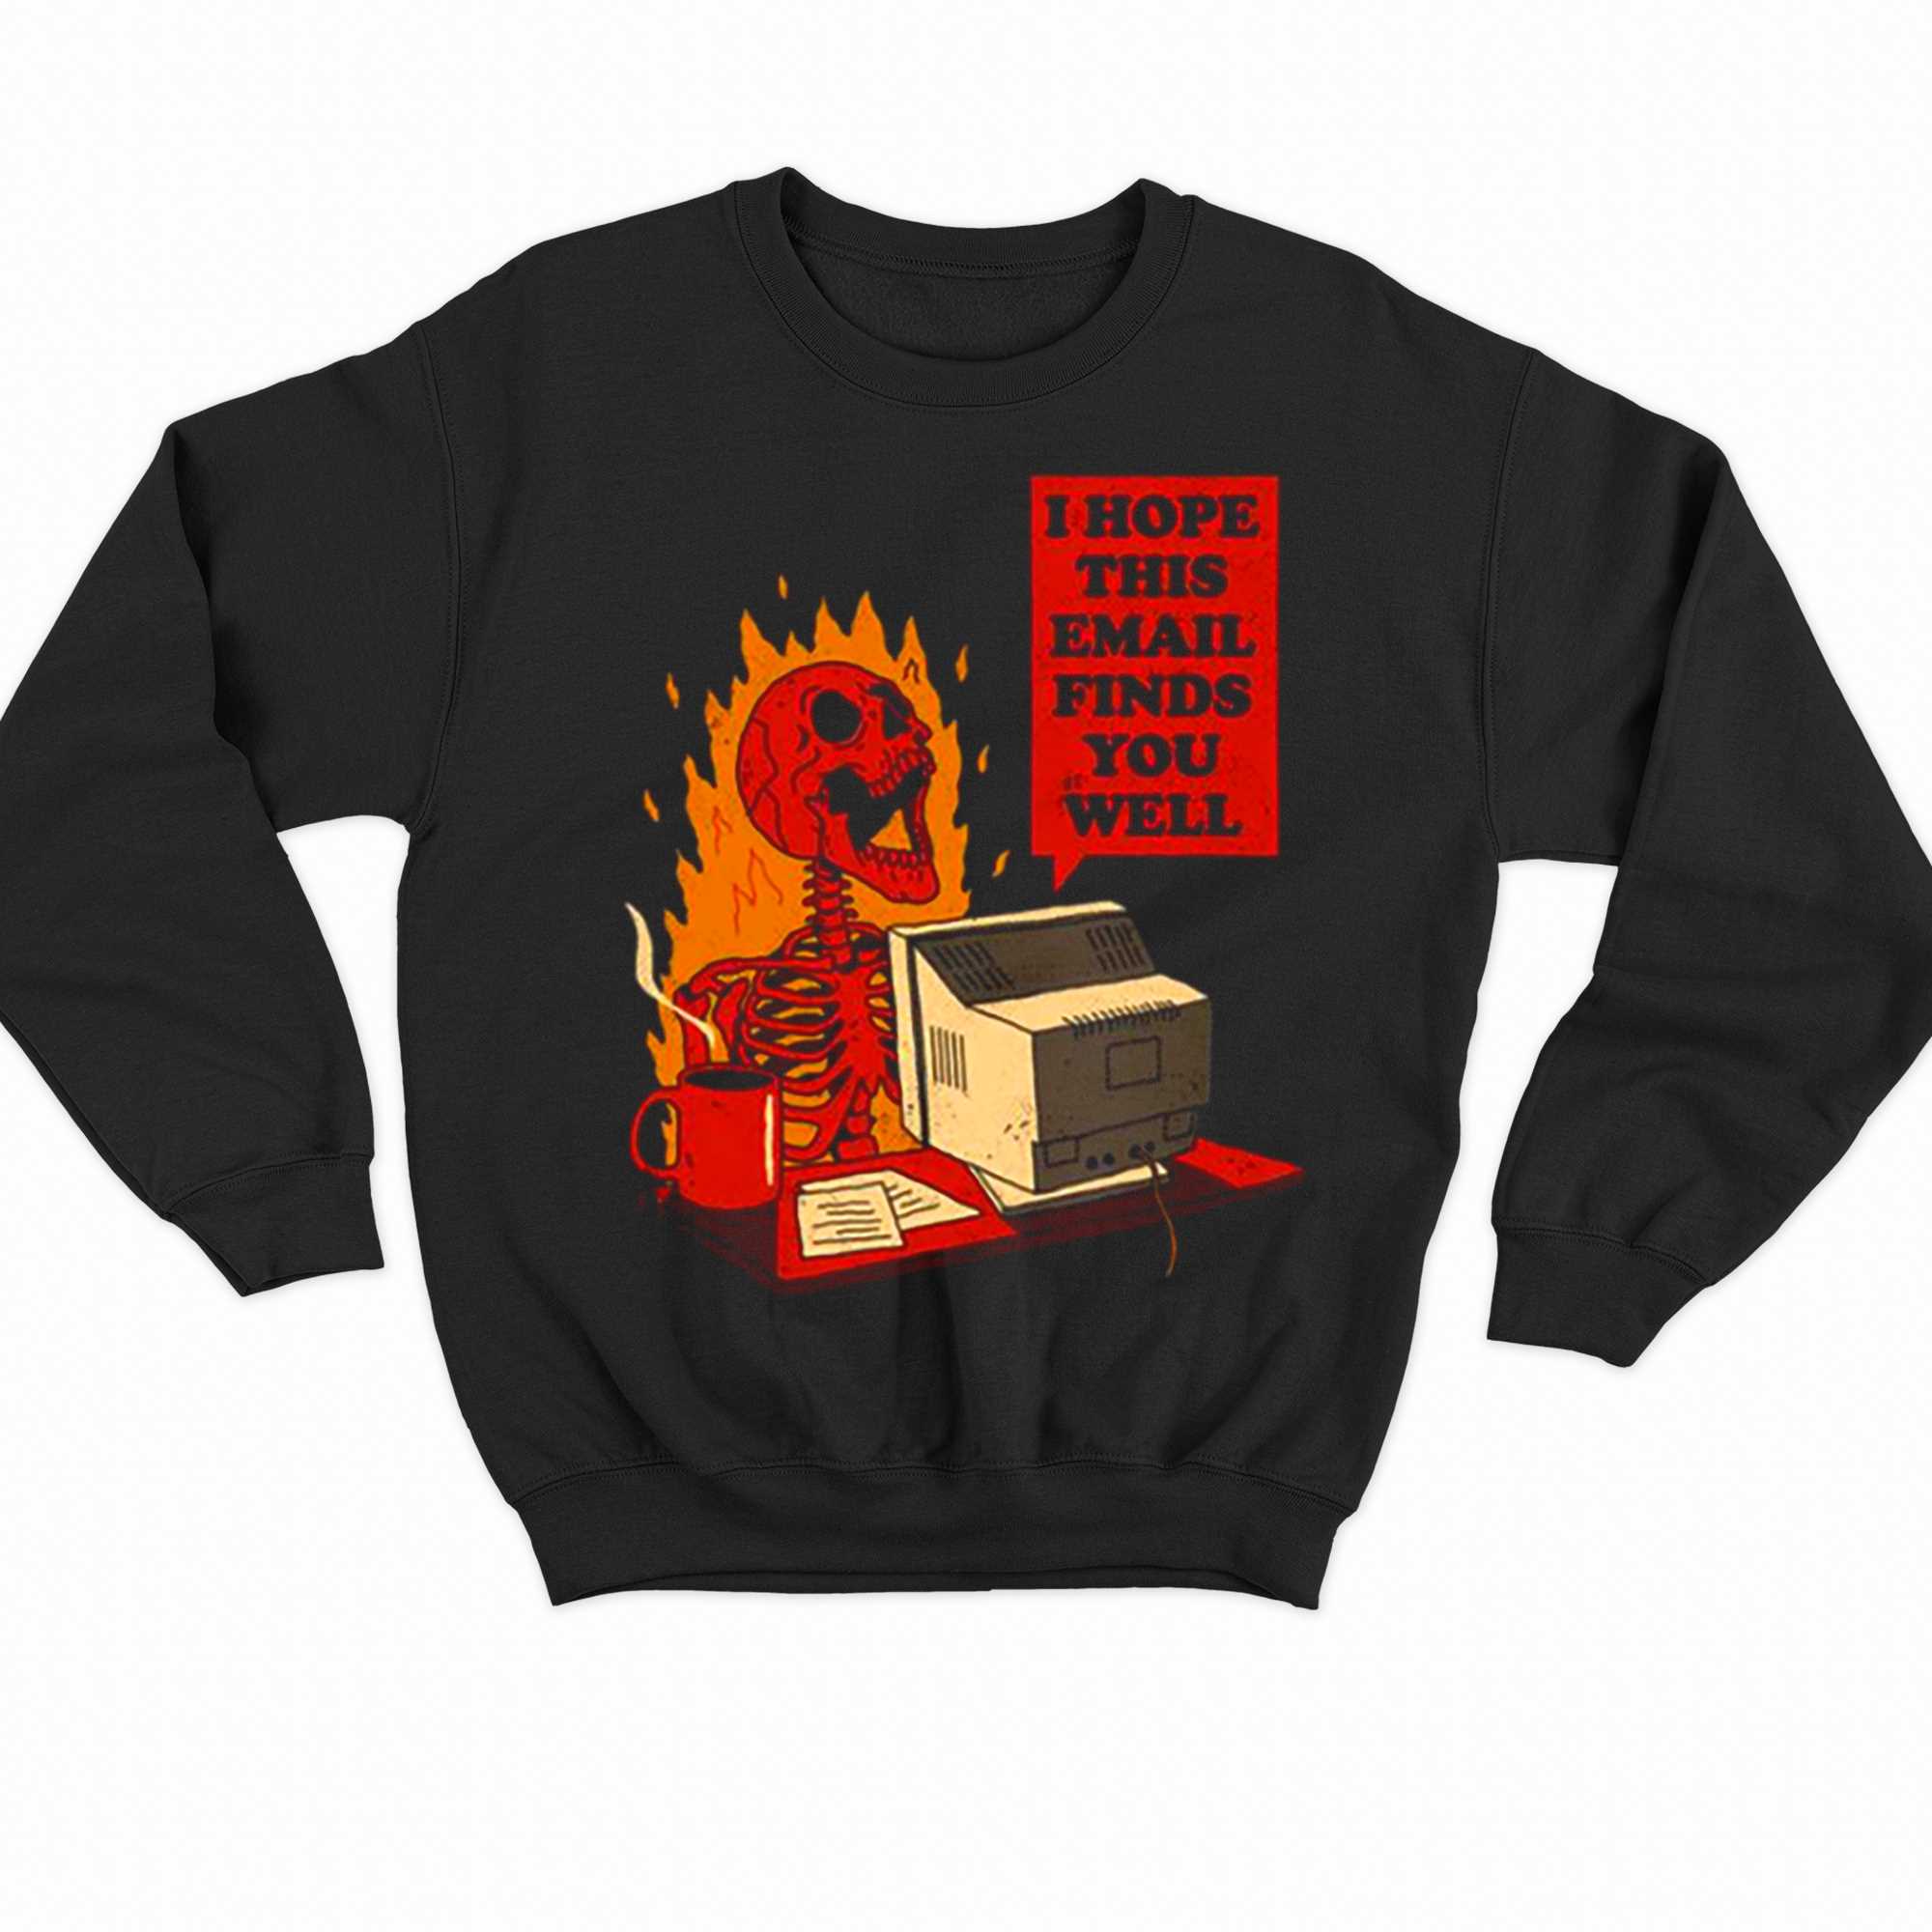 You Got Mail Offices Life Shirt 